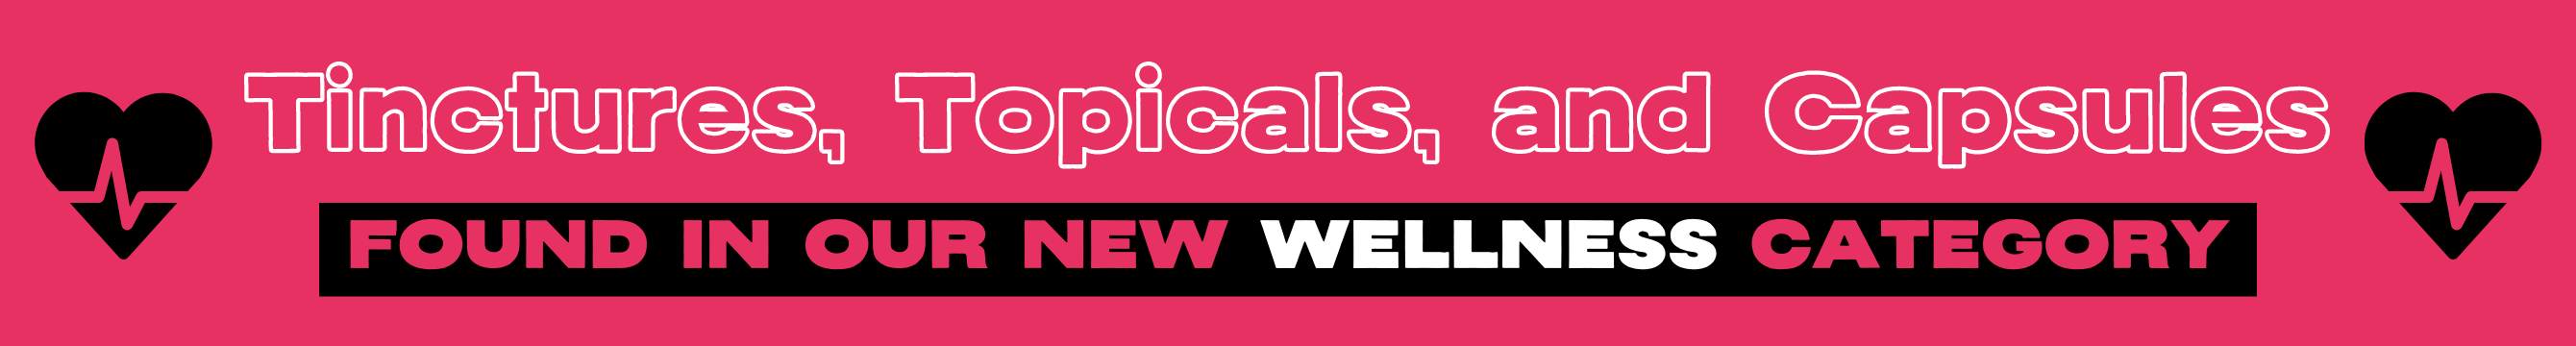 Tinctures, Topicals, and Capsules are now found in our new Wellness category